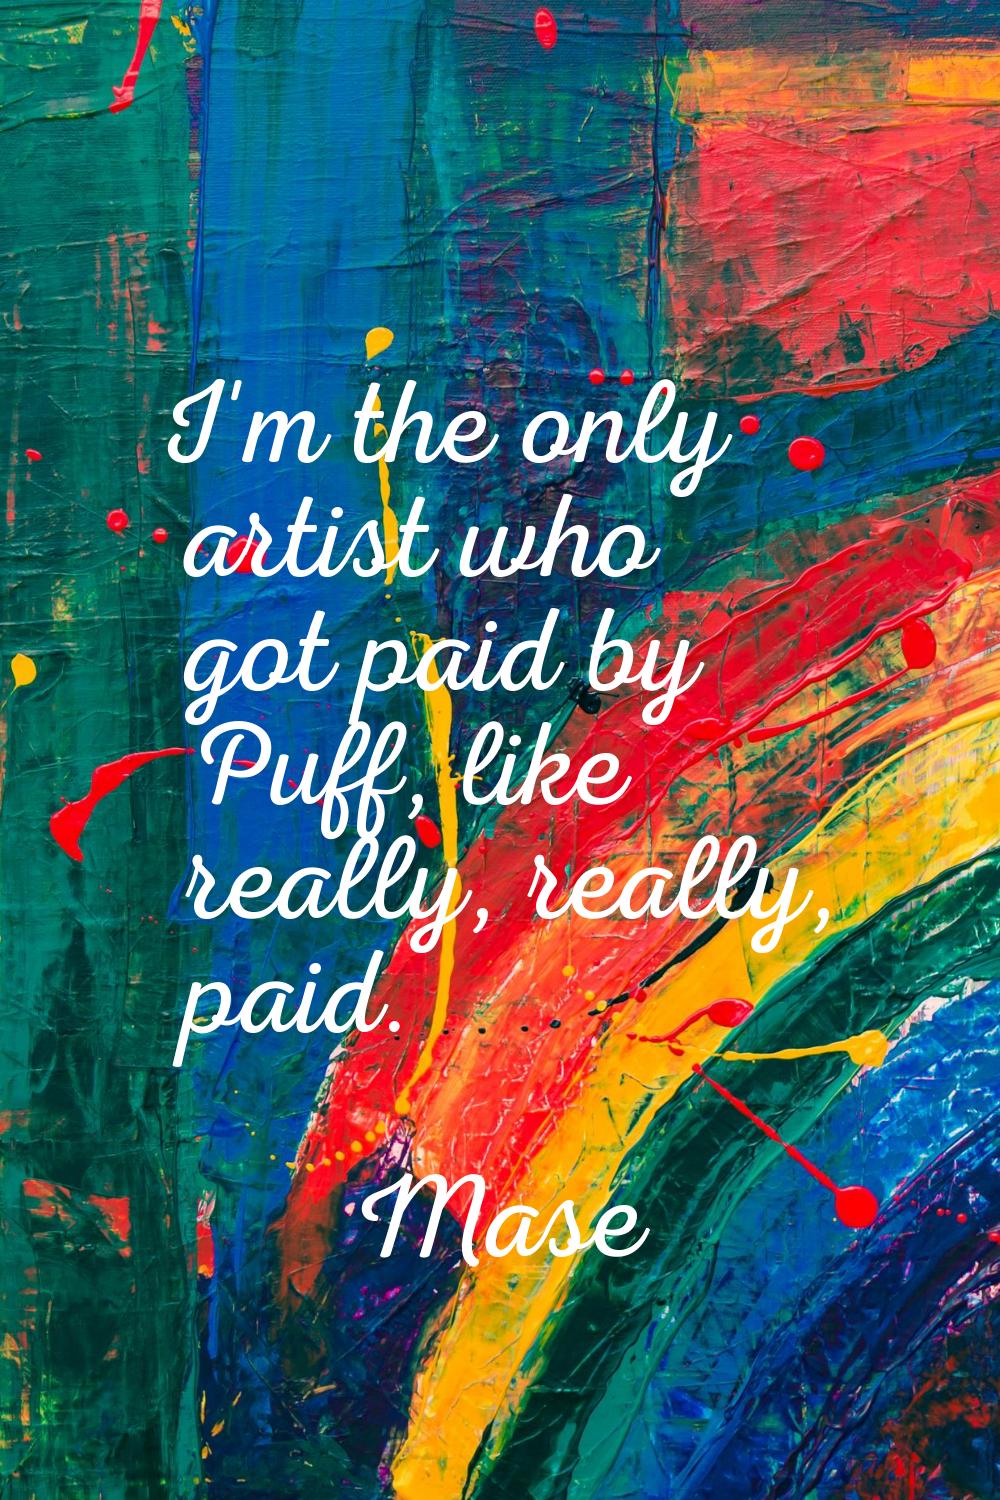 I'm the only artist who got paid by Puff, like really, really, paid.